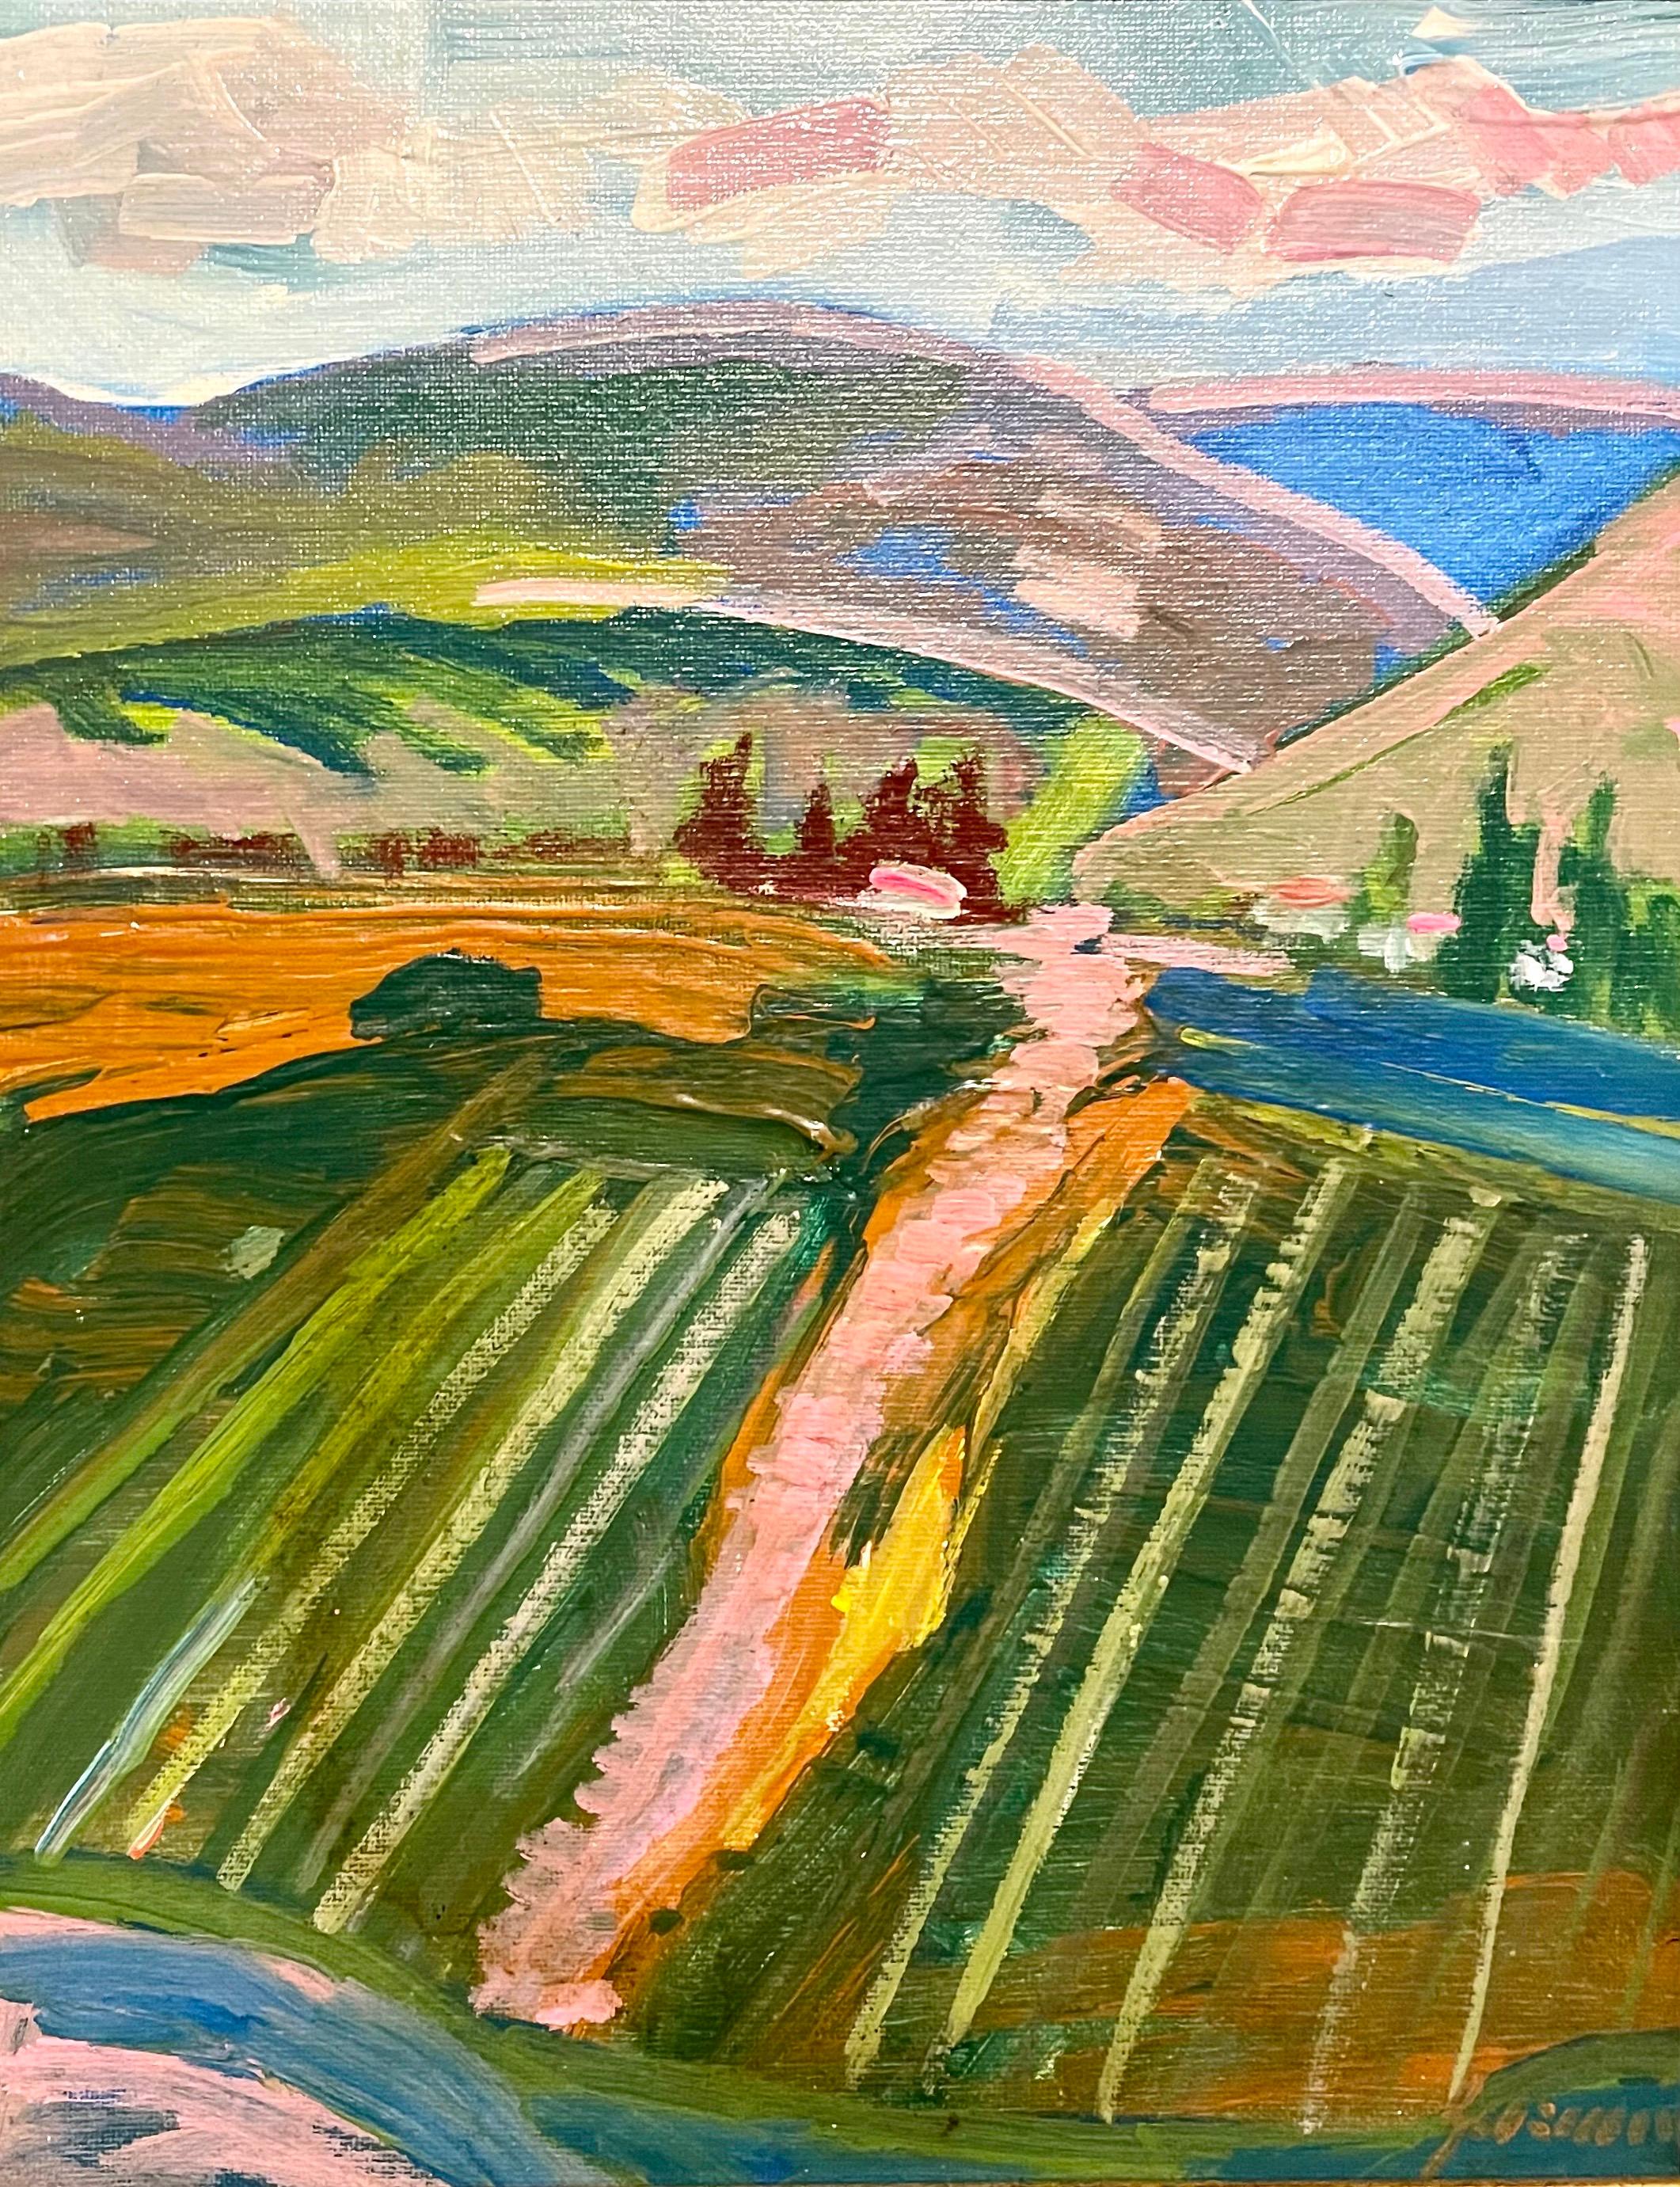 A beautiful, luminous landscape painting.
I believe this is oil paint. It might be acrylic.
17.5 X 14.5 framed.  14 X 11 sight

Juan Guzman-Maldonado is a Chilean Postwar & Contemporary painter who was born in 1948.
He moved to California in 1972.